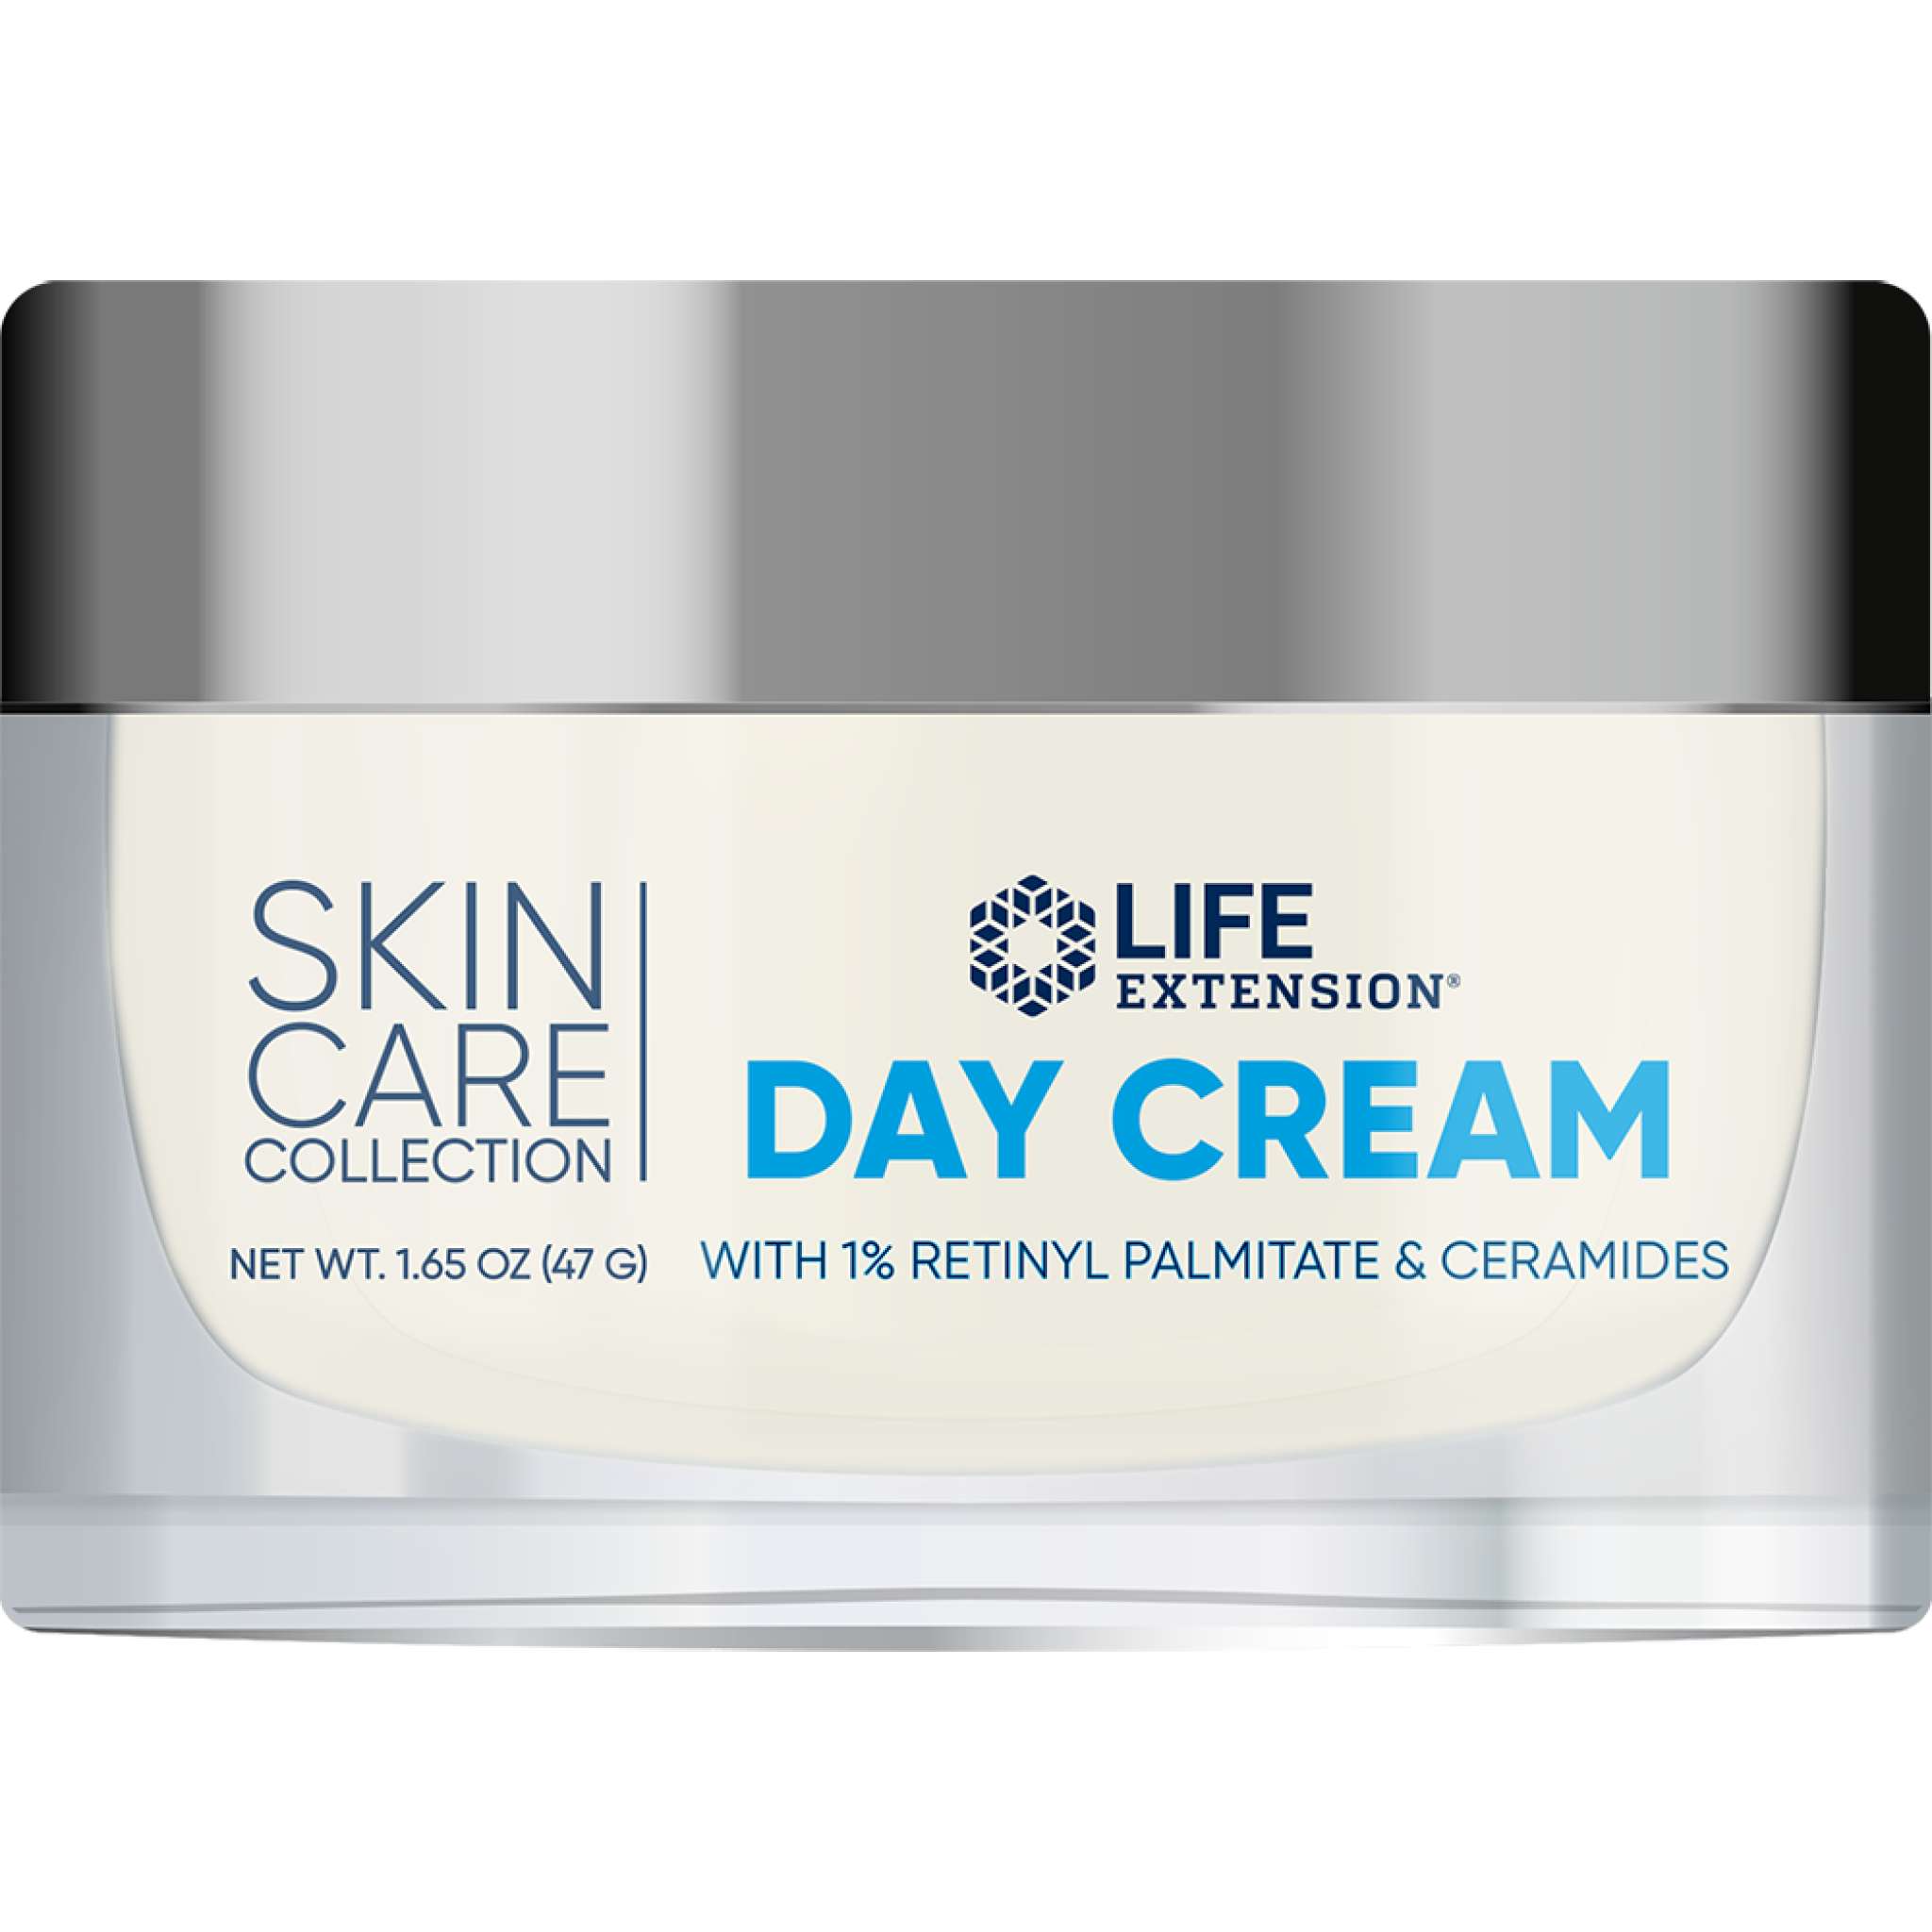 Life Extension - Day crm Skin Care